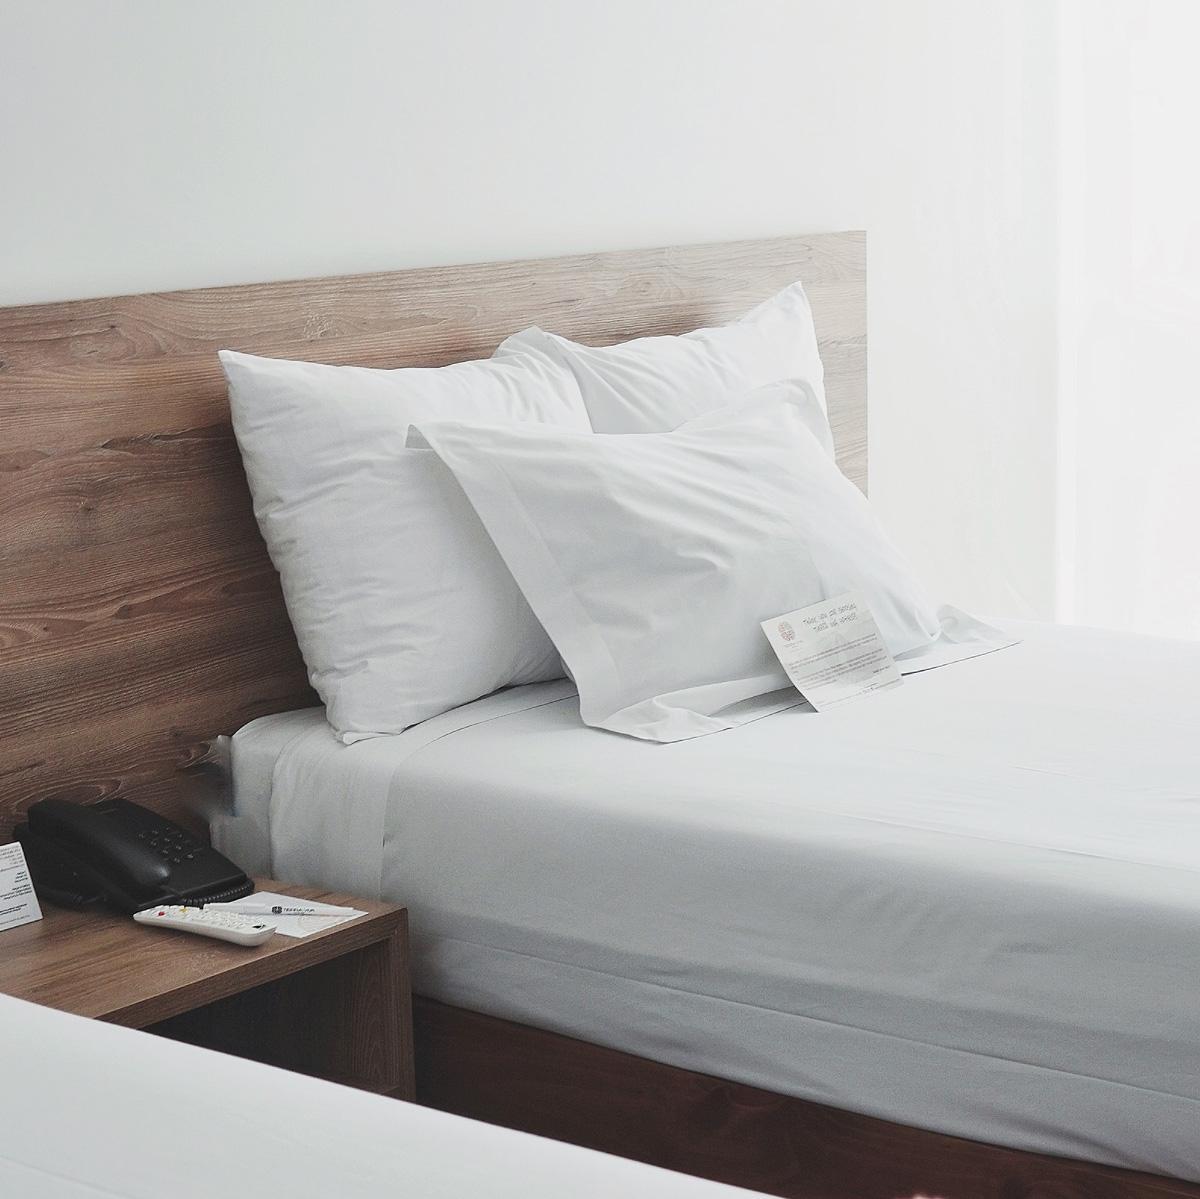 Bed Pillow Sizes and Dimensions Guide - Amerisleep